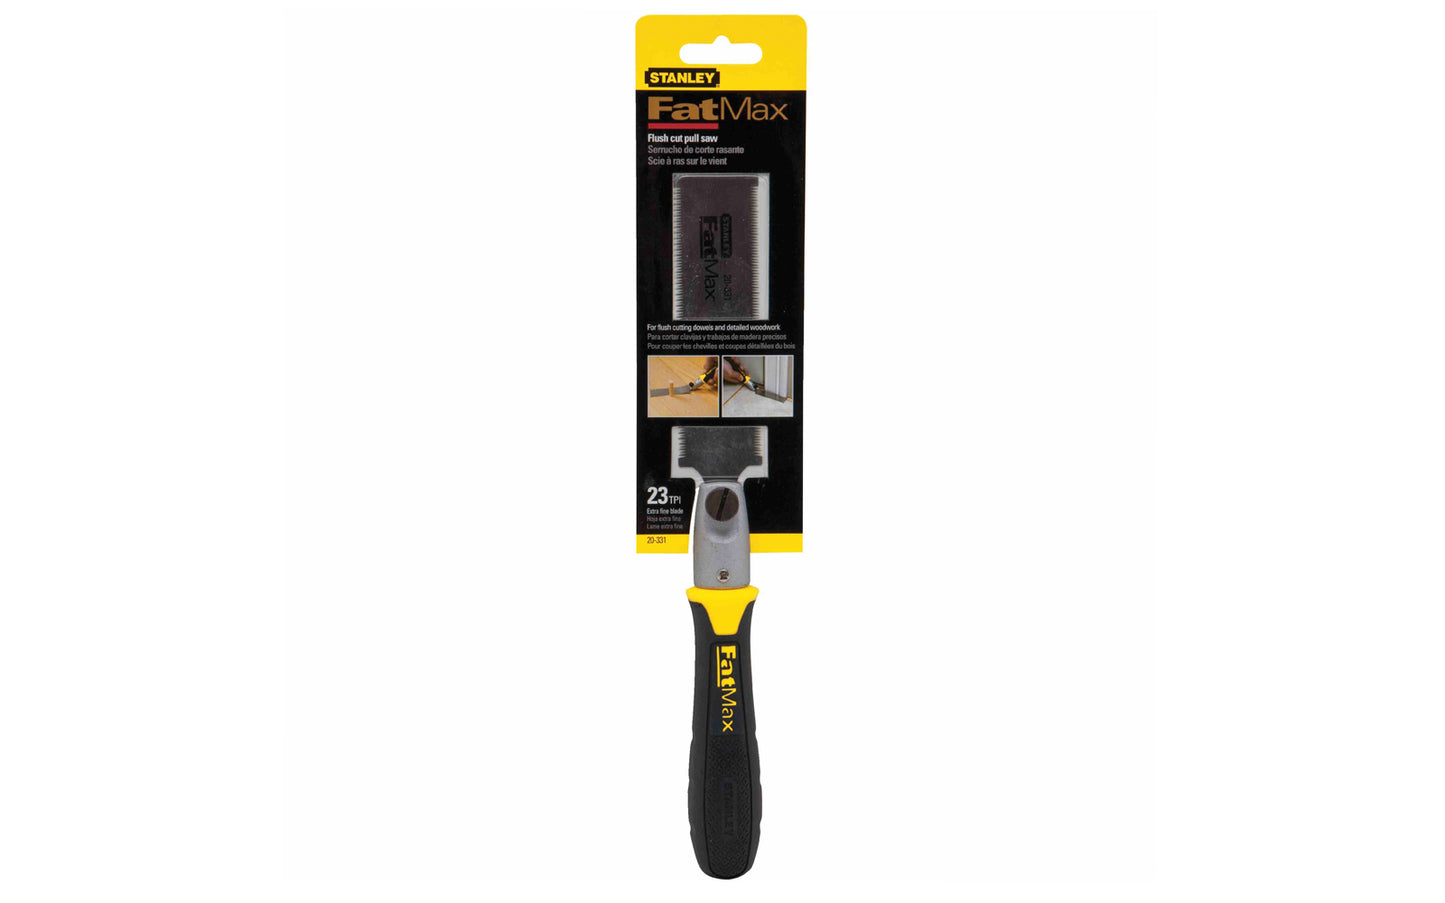 Stanley 4-3/4" Fatmax Flushcut Pull Saw ~ 20-331 - 23 TPI ~ For flush cutting dowels & detailed woodwork ~ Great for trimming through tenon or lap joints